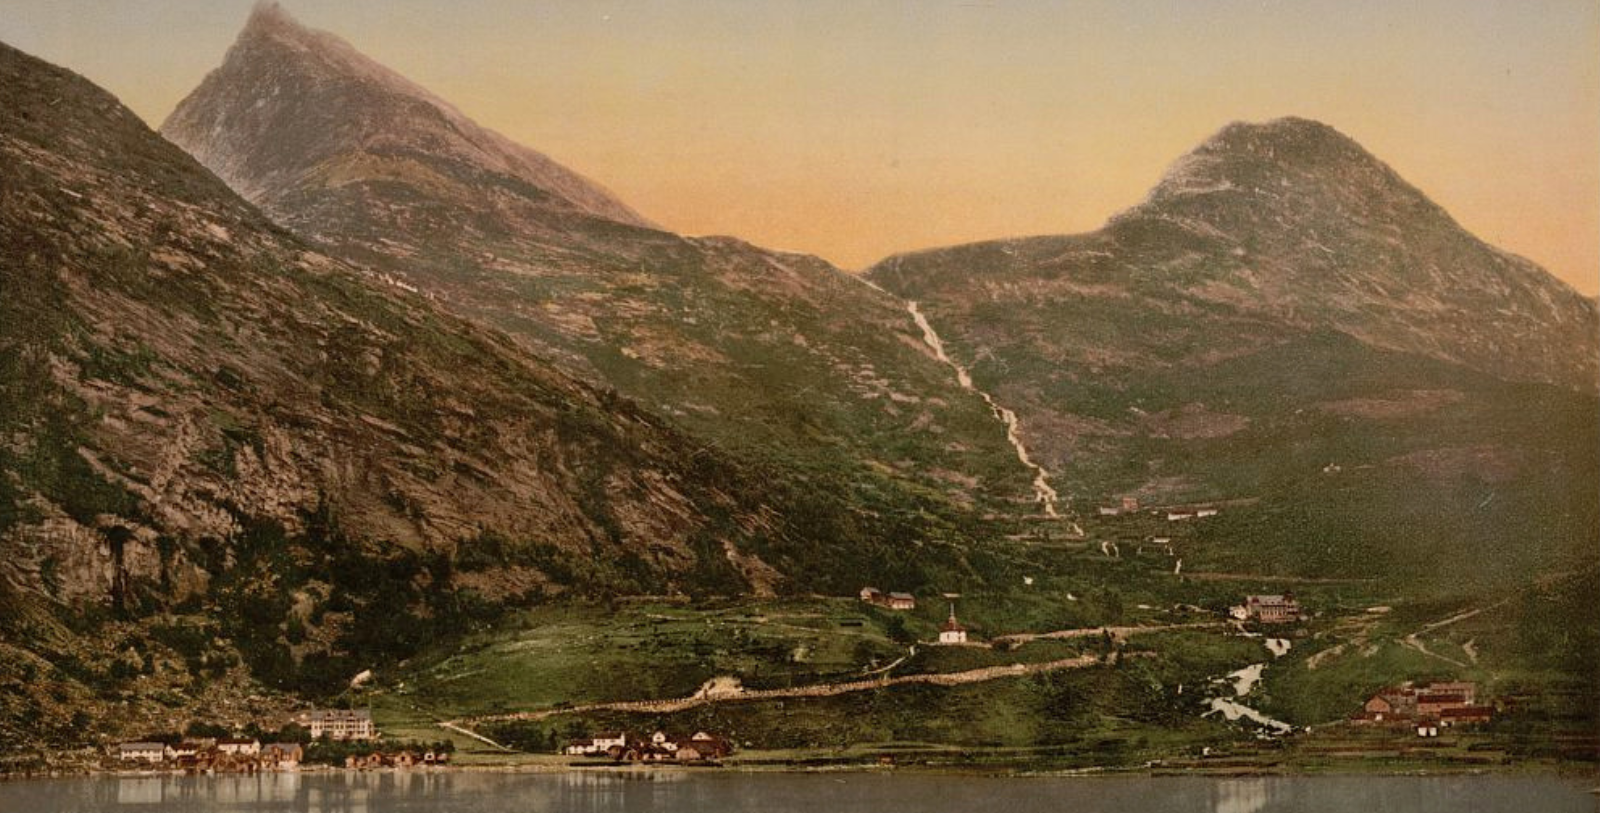 Discover the romantic alpine-inspired architecture of Hotel Union Geiranger, which is evocative of a Swiss chalet—perfect for its fjordside setting.